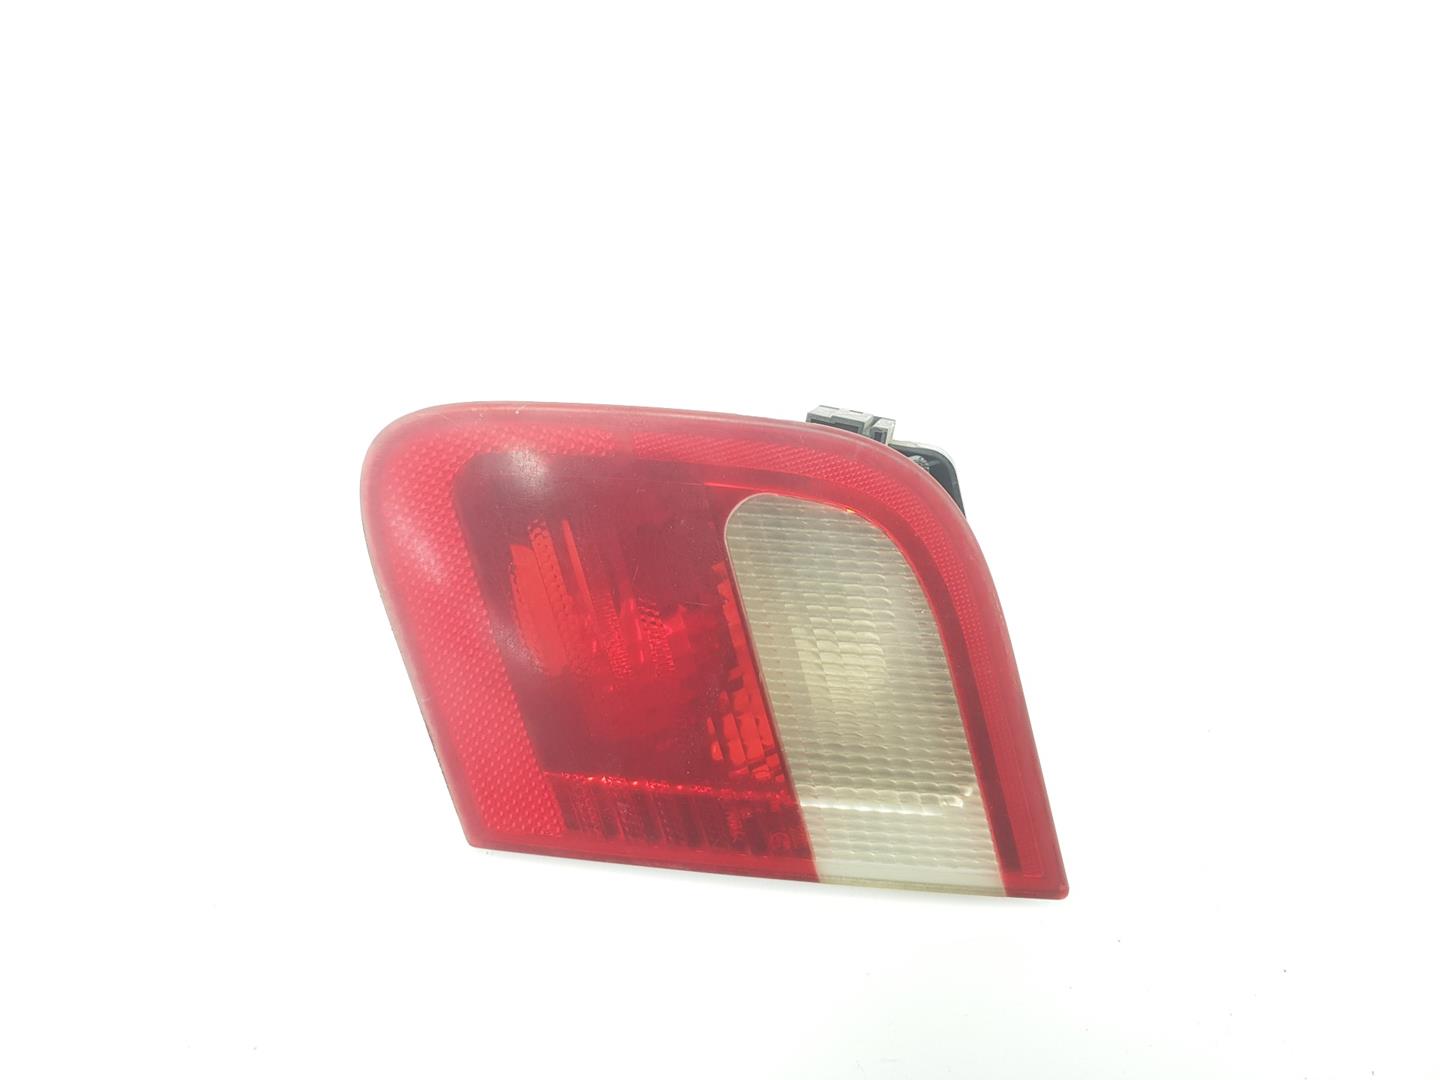 BMW 3 Series E46 (1997-2006) Rear Right Taillight Lamp 8364924, 63218364924 23754791